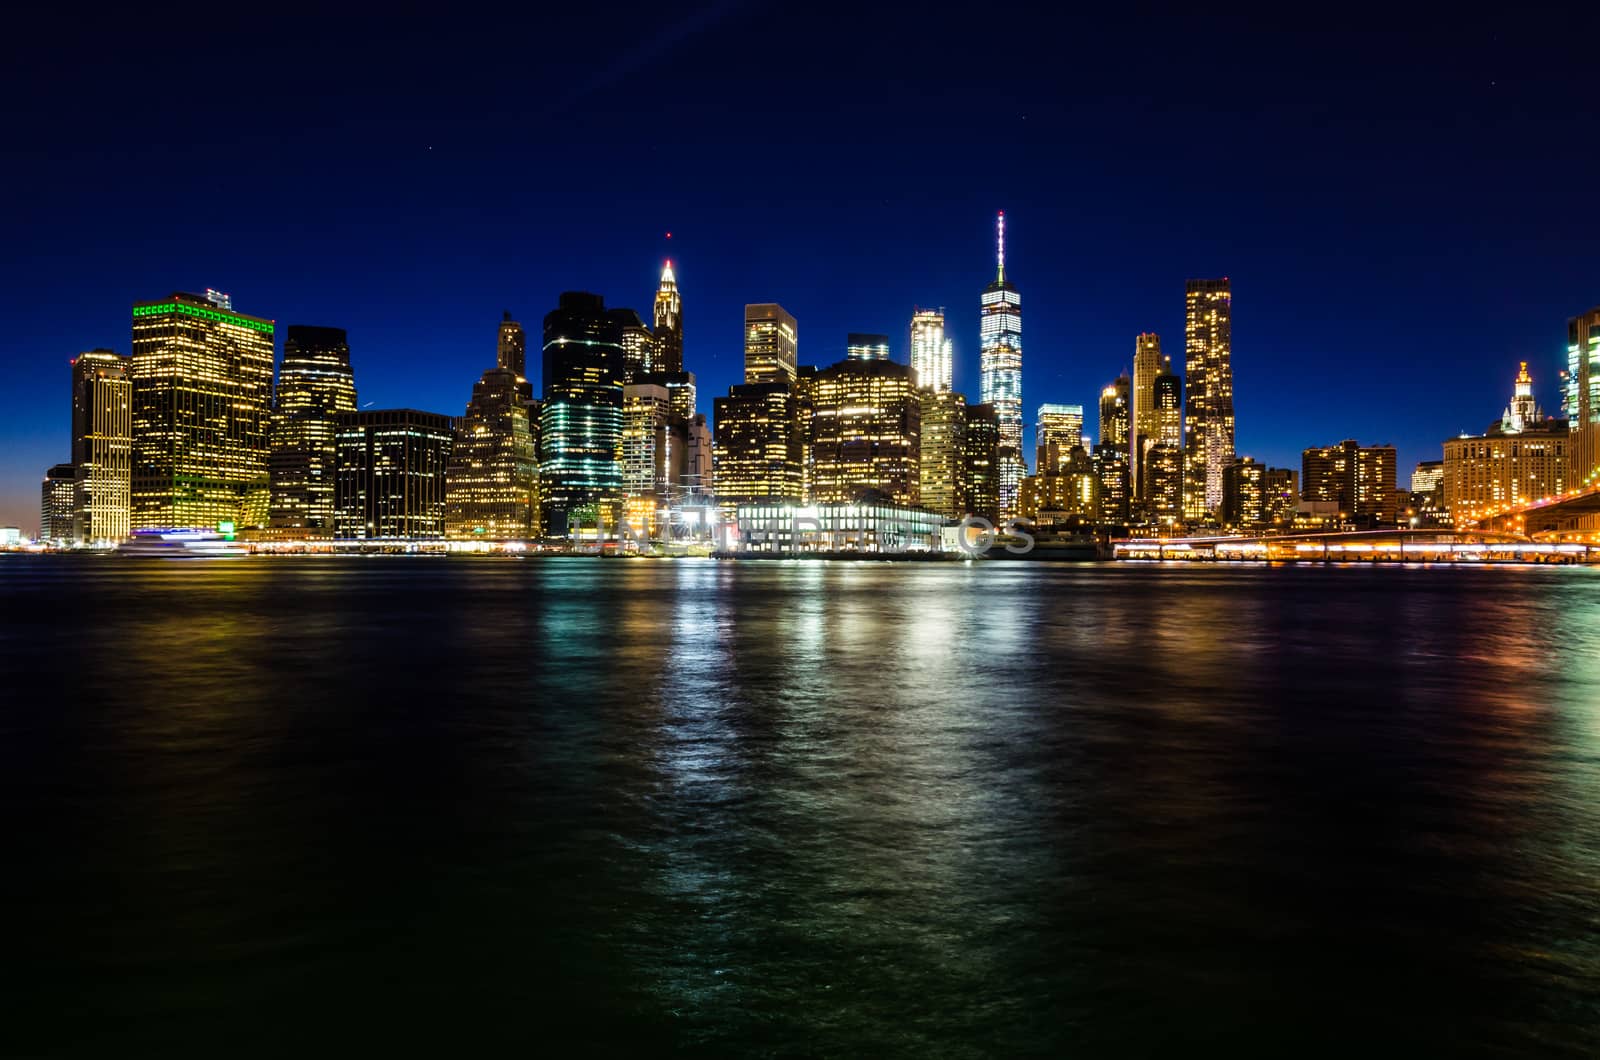 View of illuminated Manhattan skyline at twilight, with skyscraper lights reflected on the river. New York City, USA